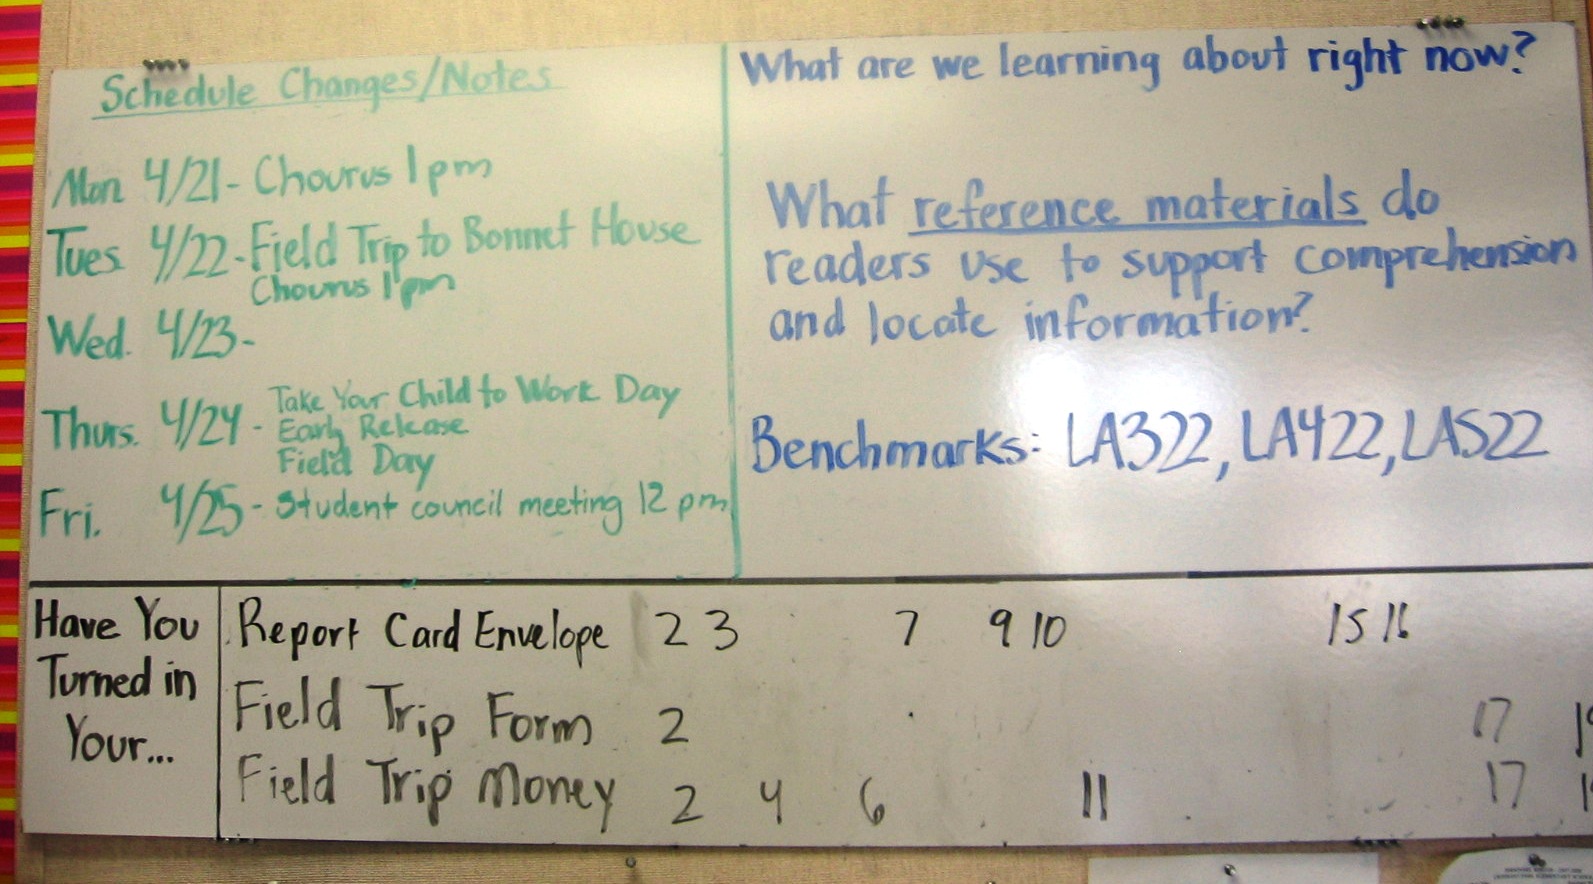 Later, I combined the “Have You Turned In Your…” section with our daily schedule notes and reading benchmark display.